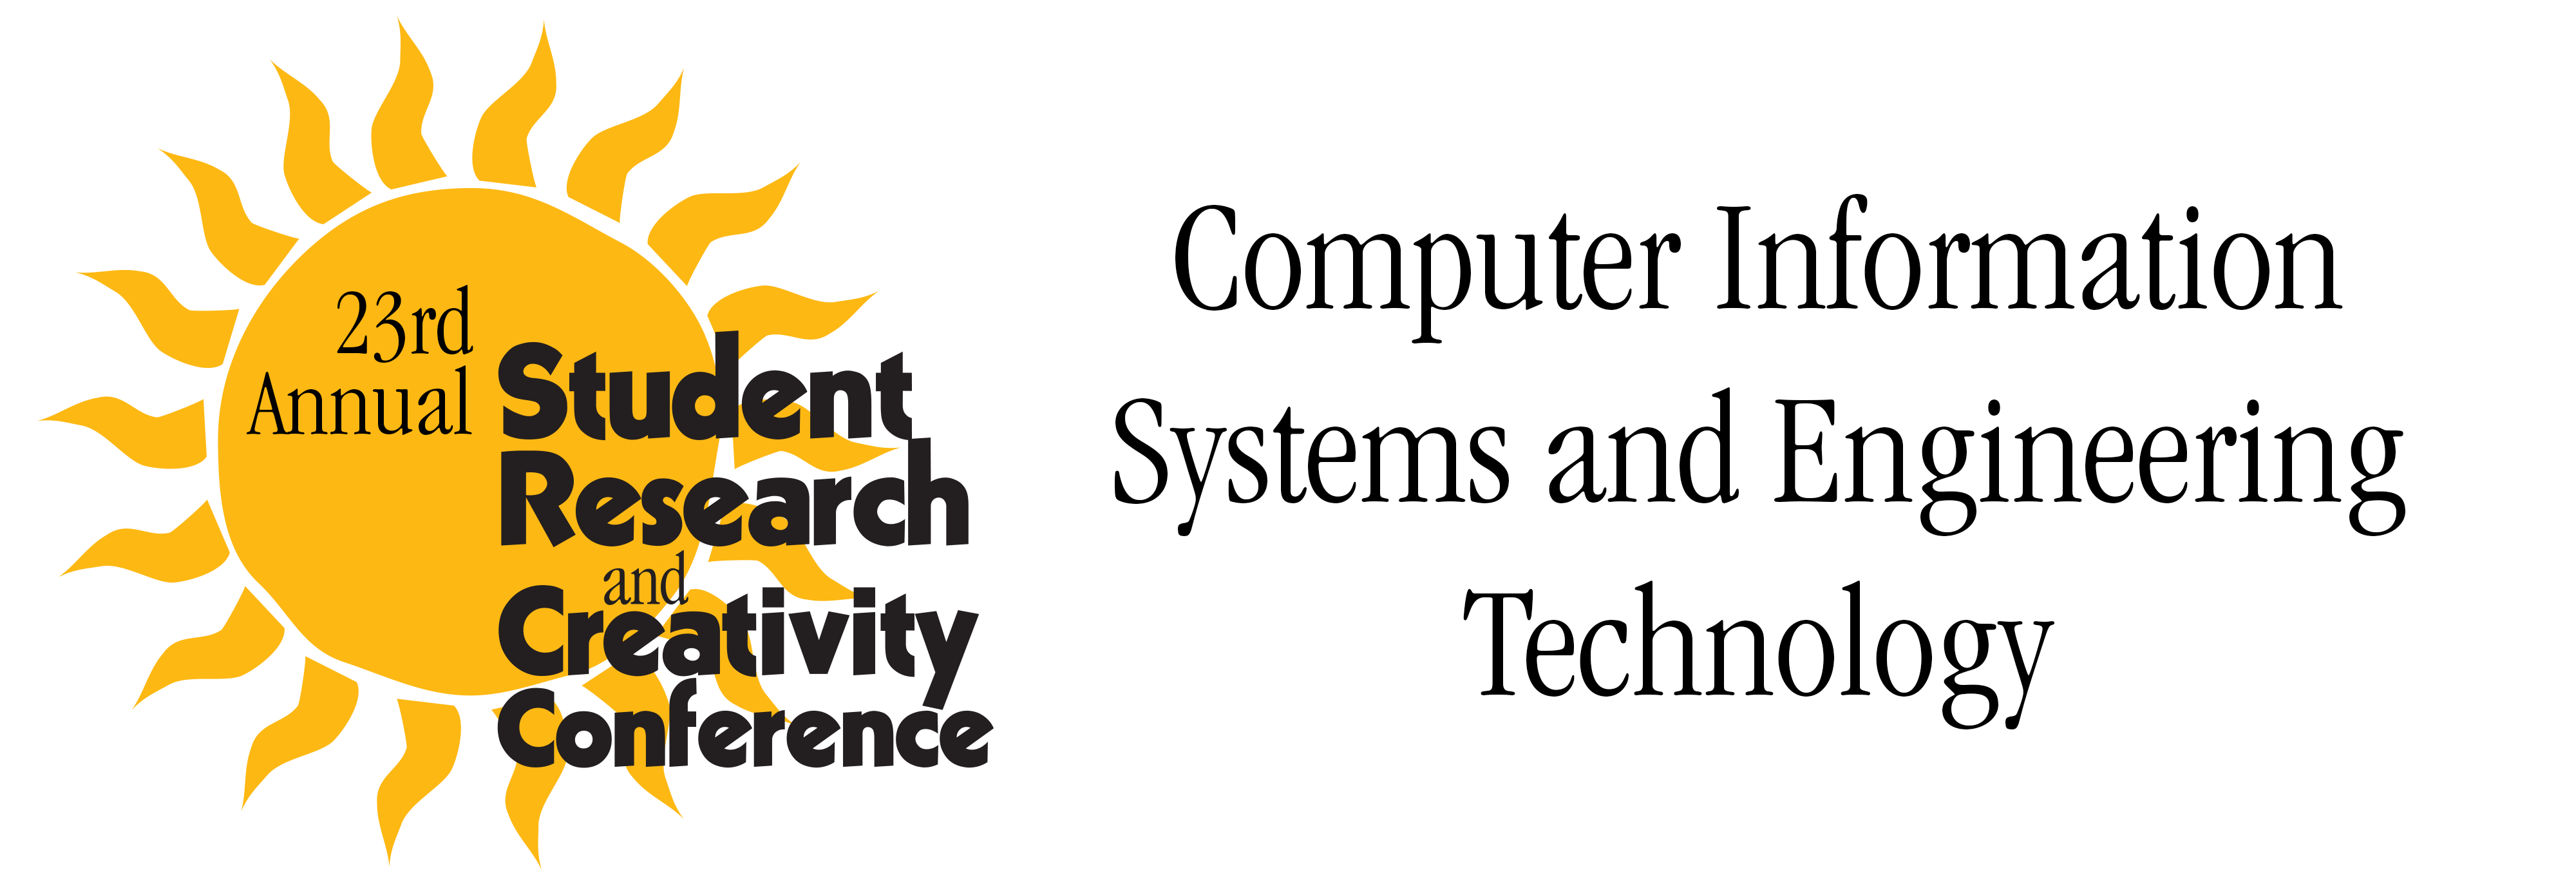 Computer Information Systems and Engineering Technology